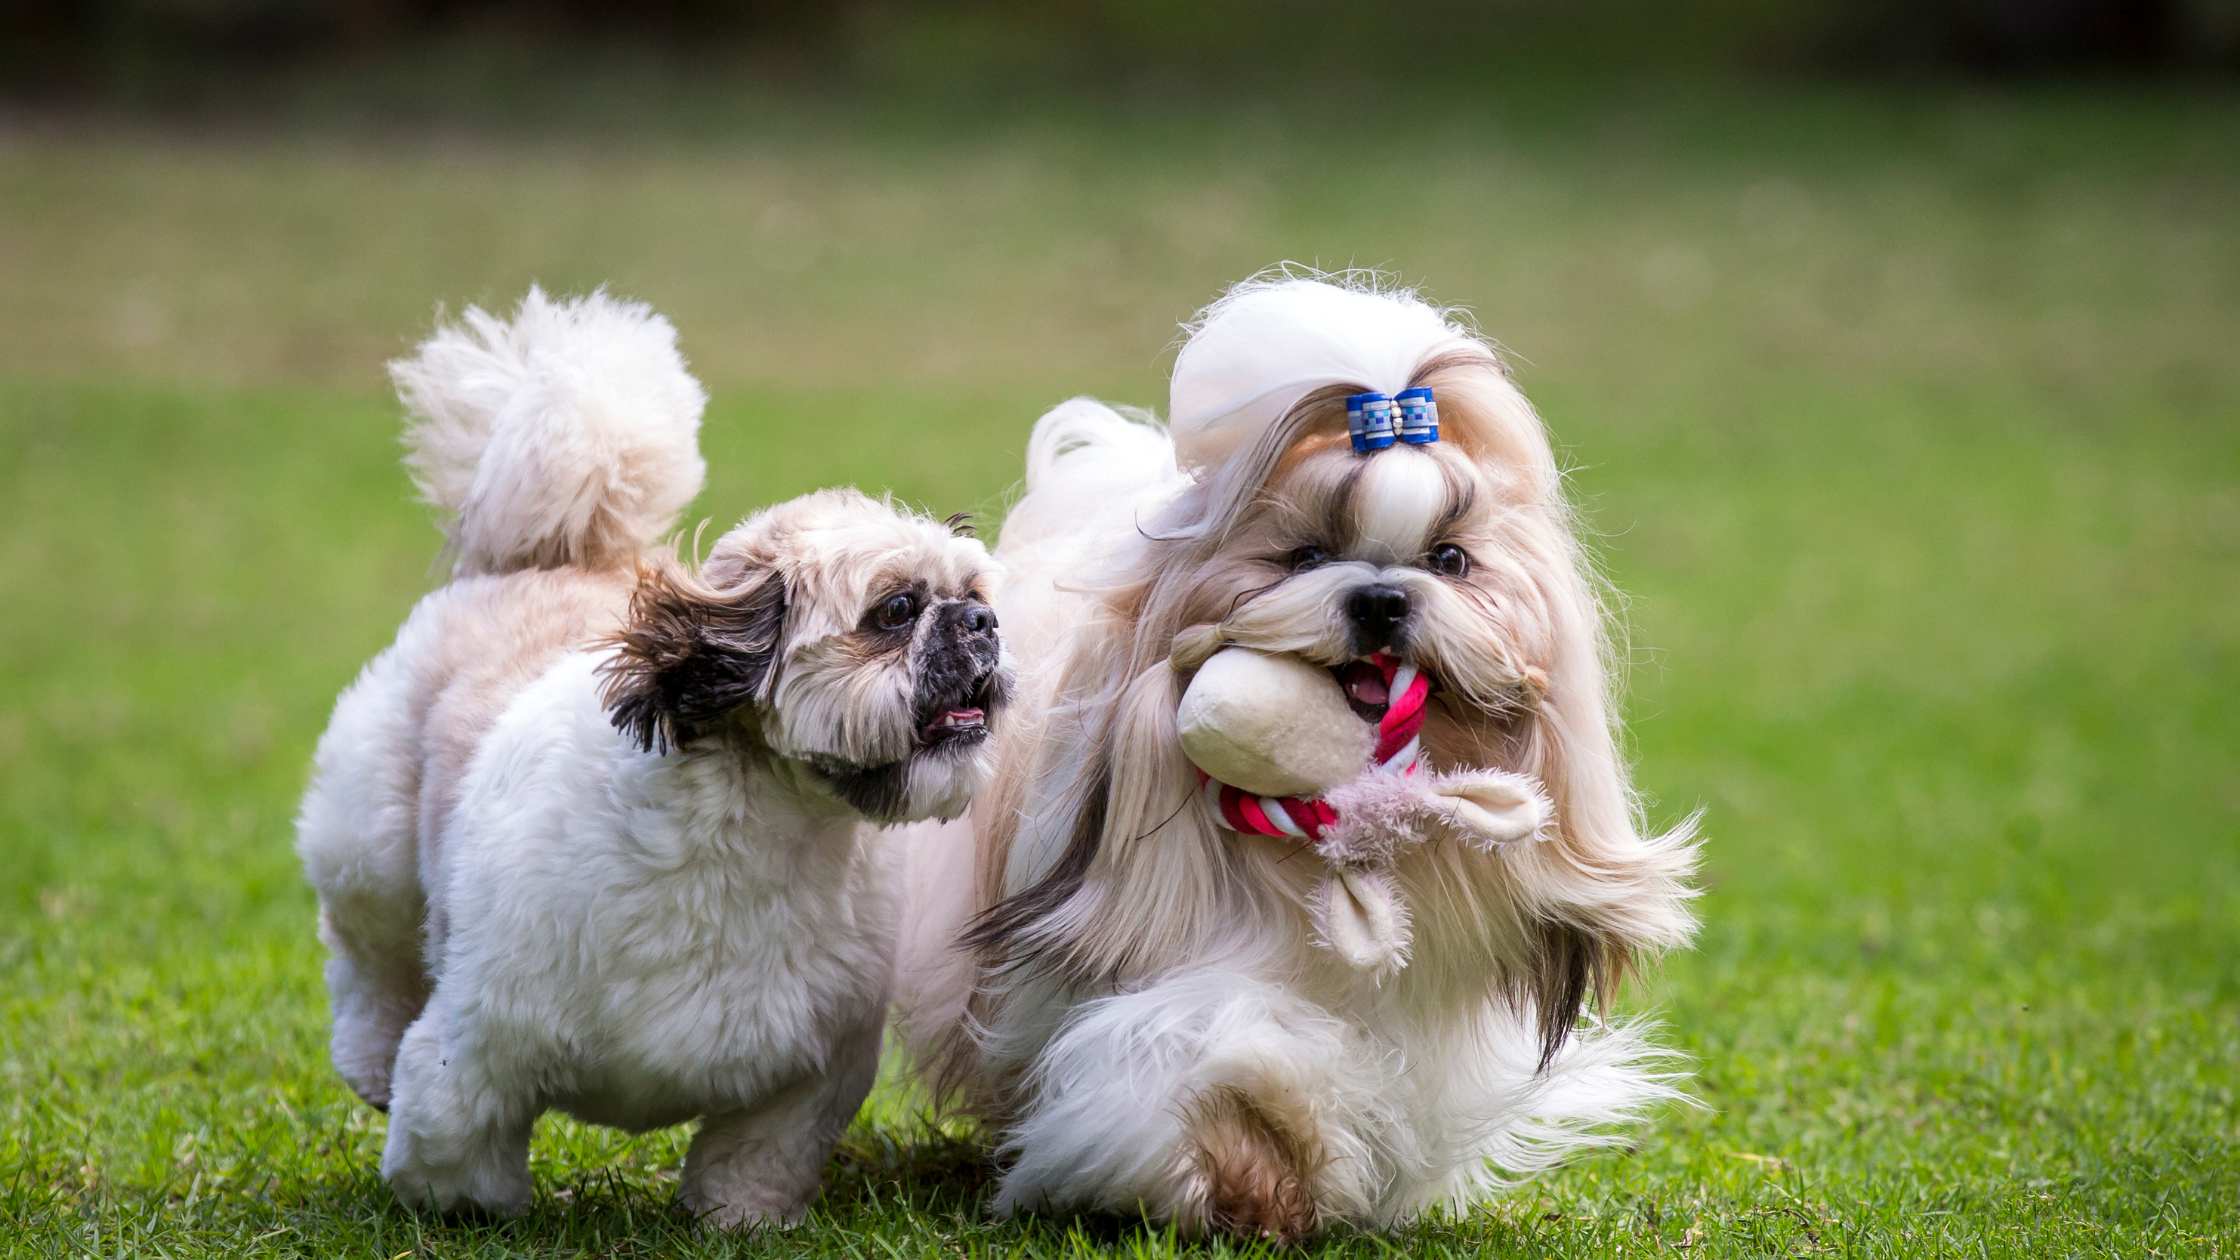 socializing your small dog